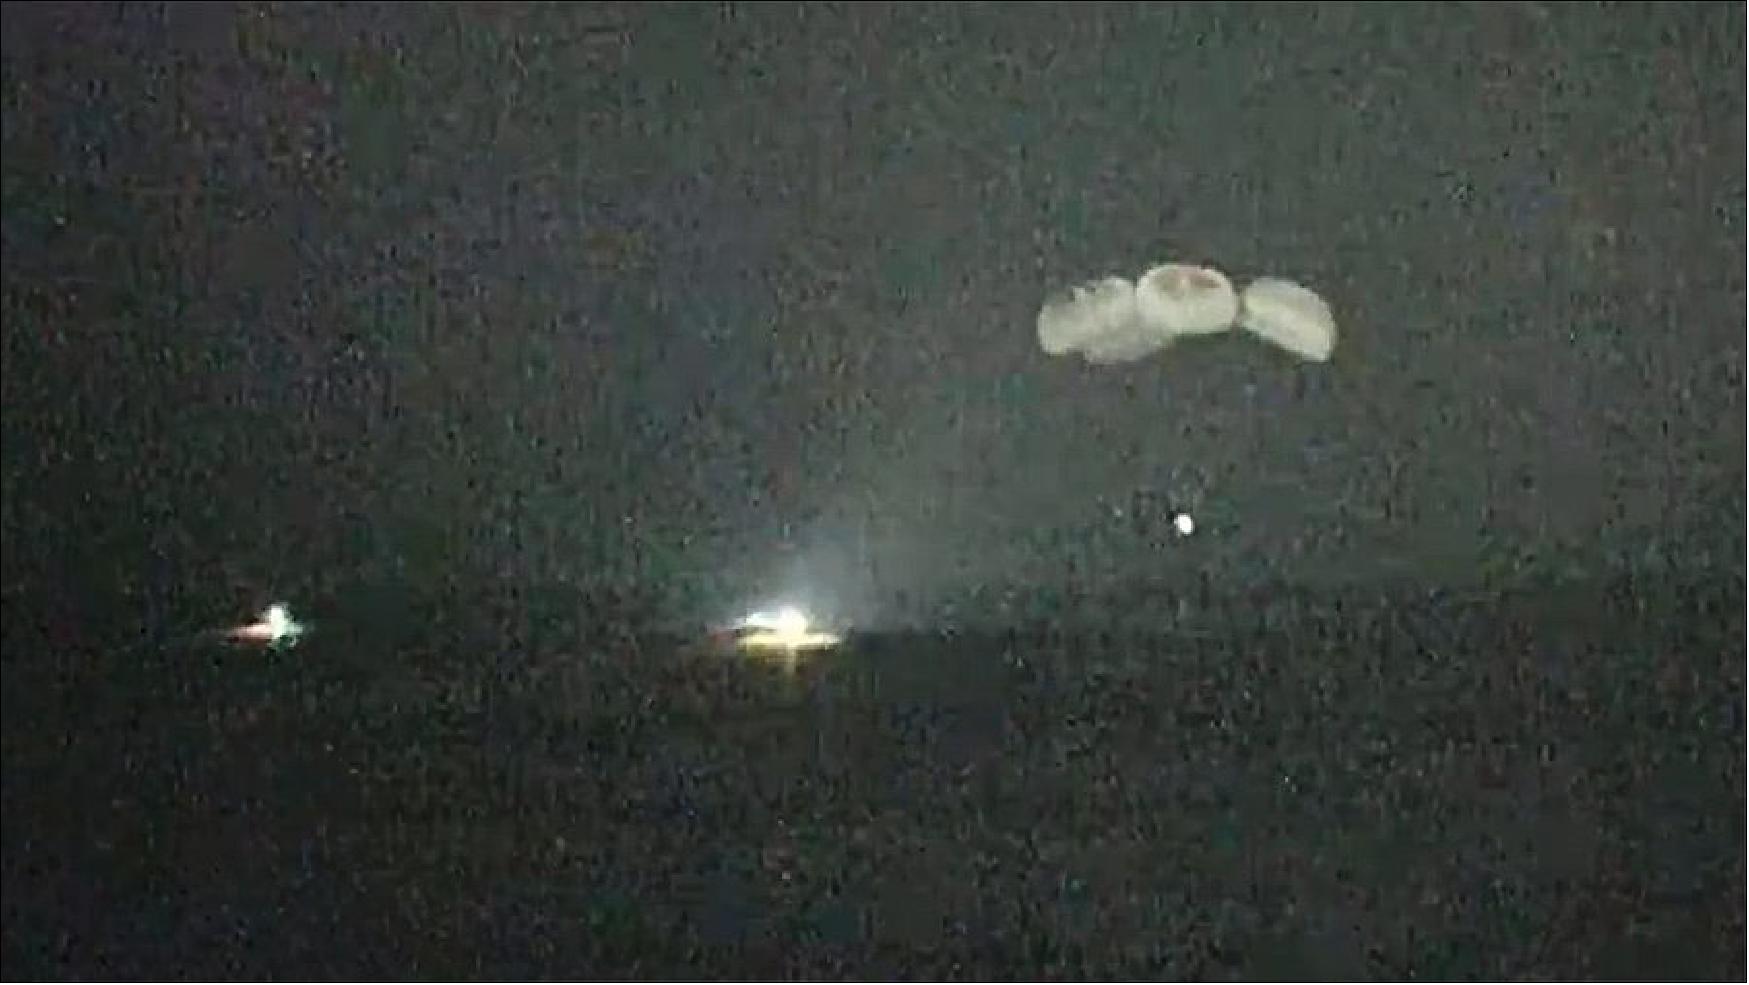 Figure 8: A night-vision camera captures the SpaceX Crew Dragon parachuting to splashdown in the Gulf of Mexico as fast boats arrive to retrieve the crew (image credit: NASA TV) 8)